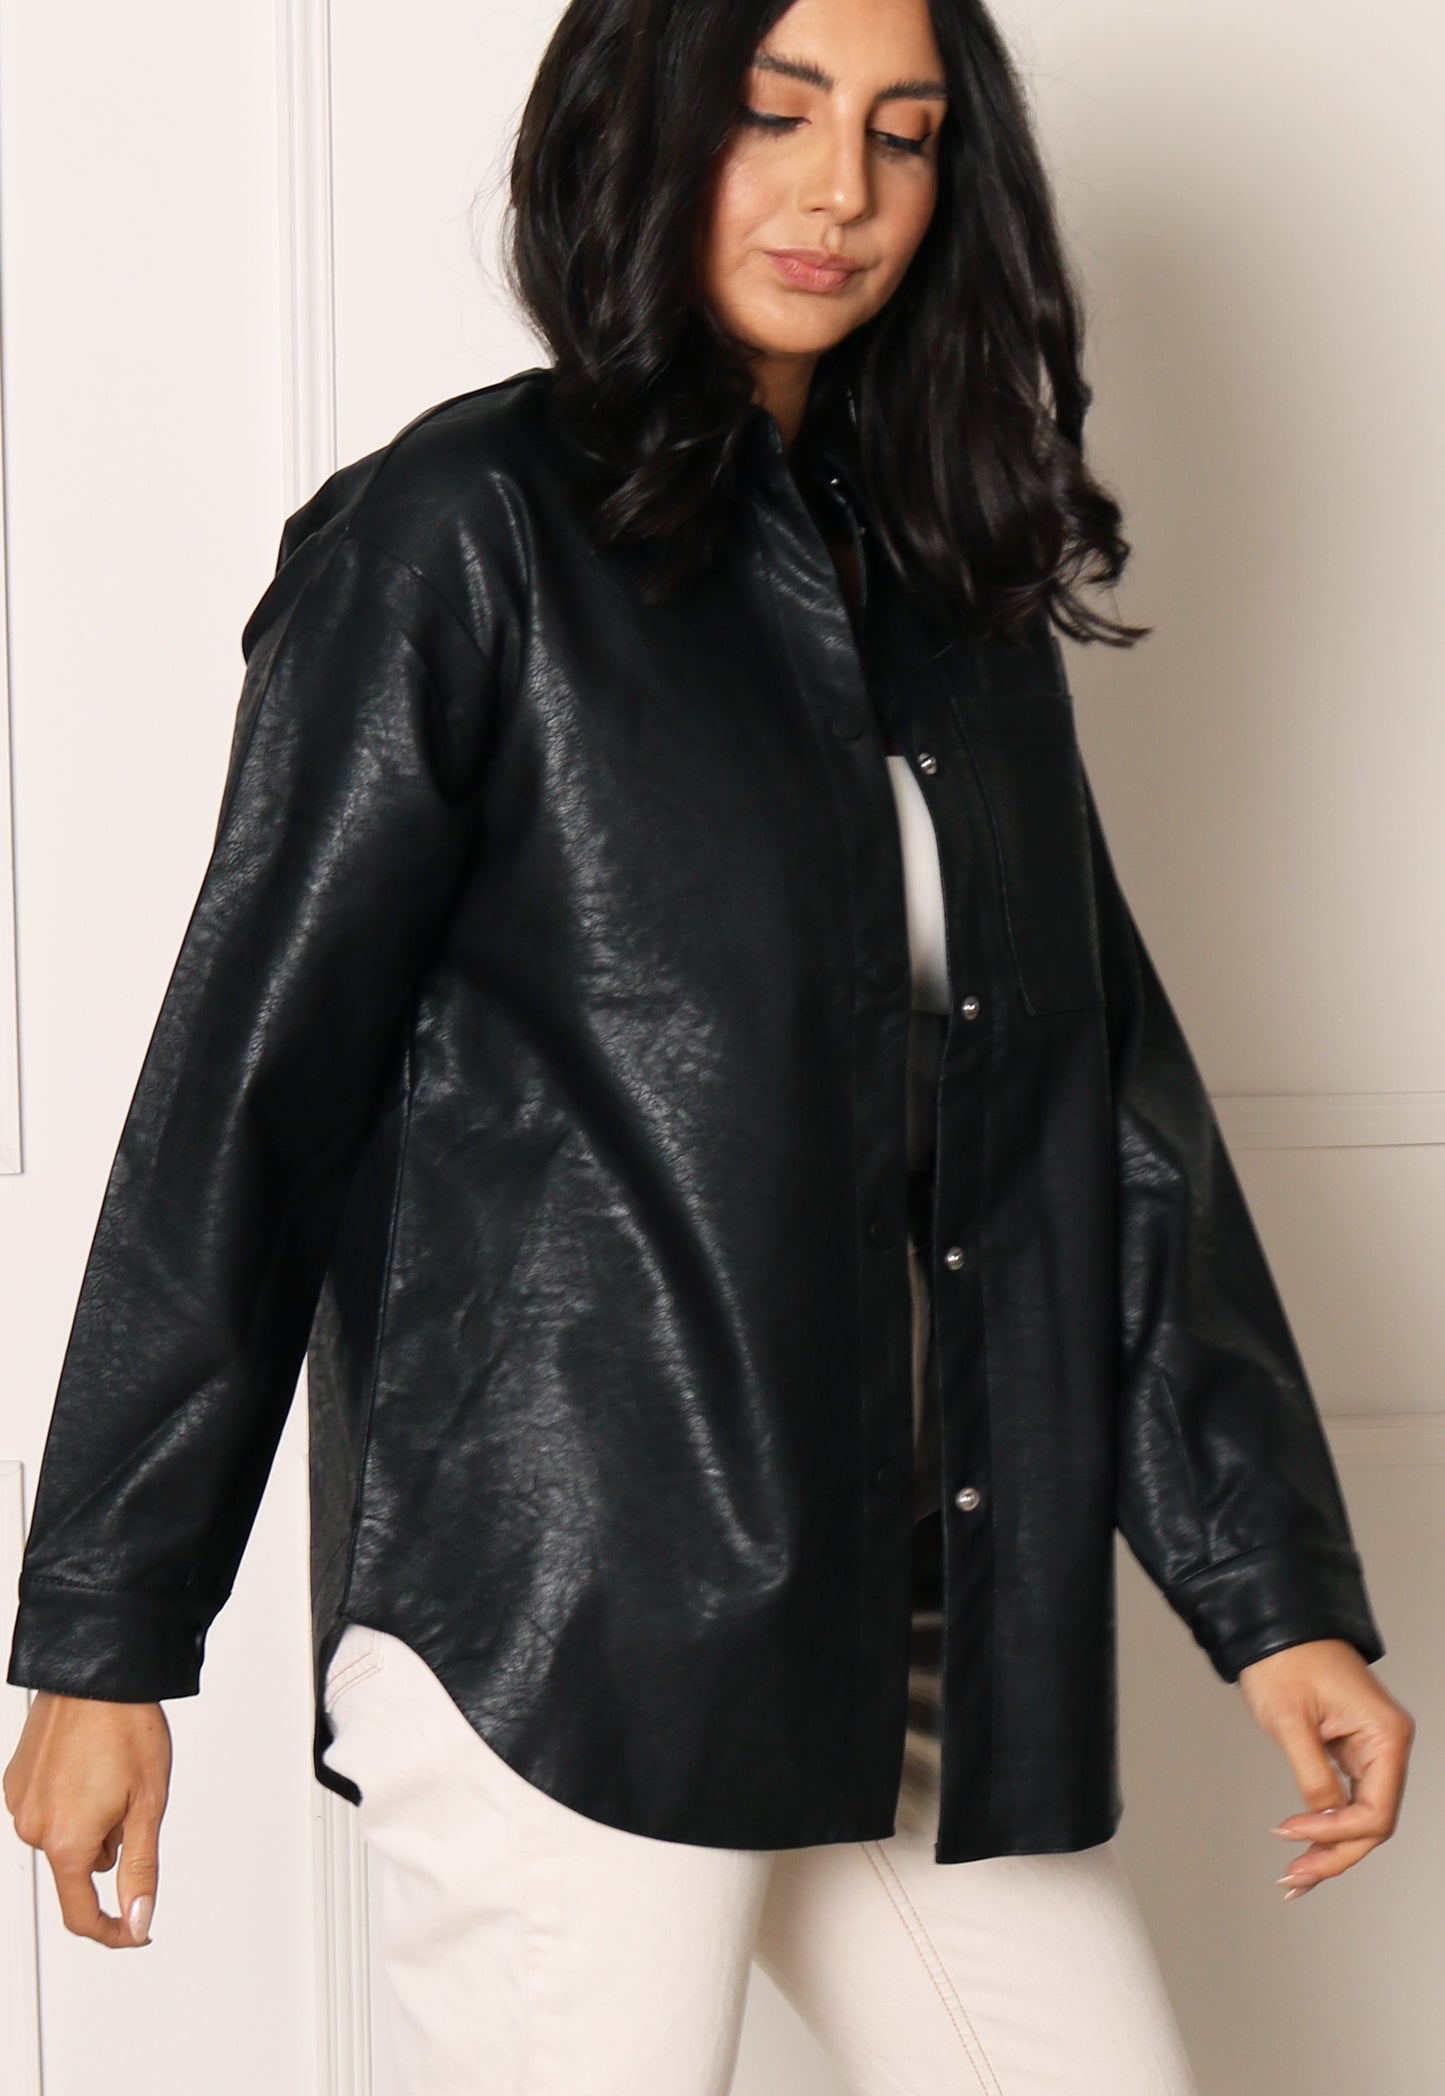 ONLY Mia Faux Leather Curve Hem Shacket in Black - concretebartops